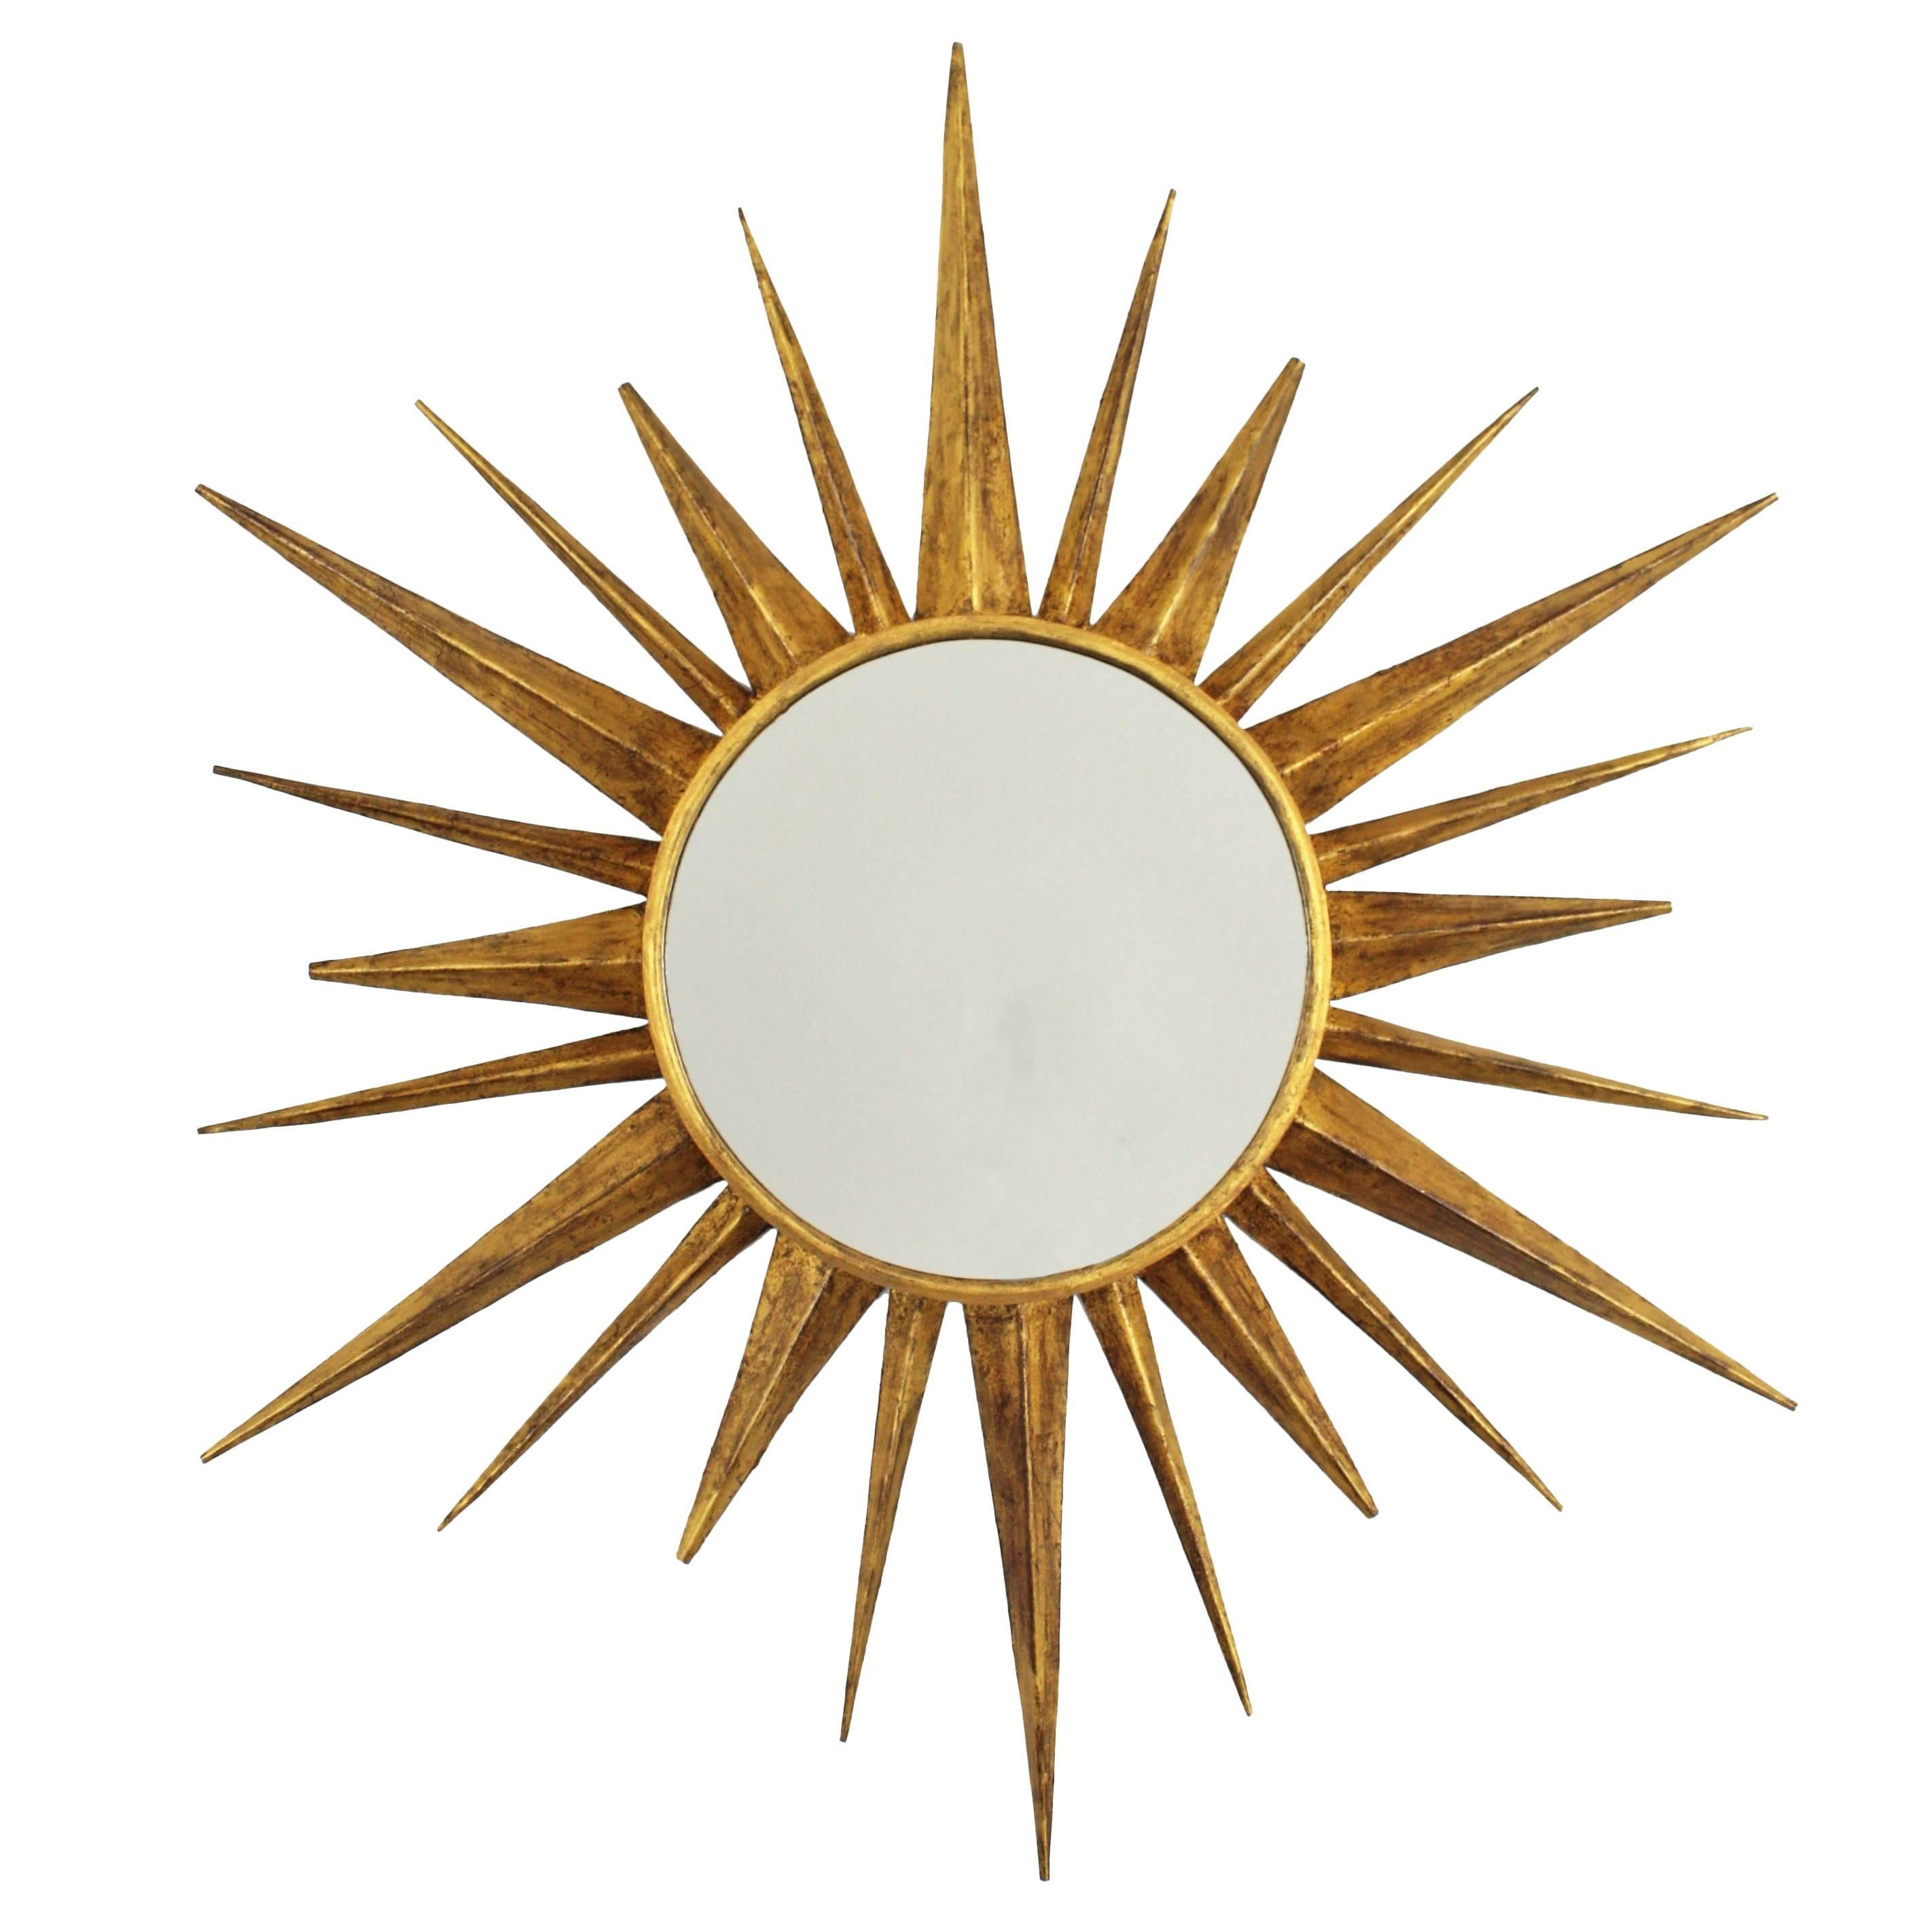 A highly decorative sunburst ceiling flush mount lamp that can be also a sunburst mirror. Hand-hammered iron with gold leaf finish and frosted glass , amber glass diffuser  or mirror in the centre. This piece can work also as a sunburst mirror (the